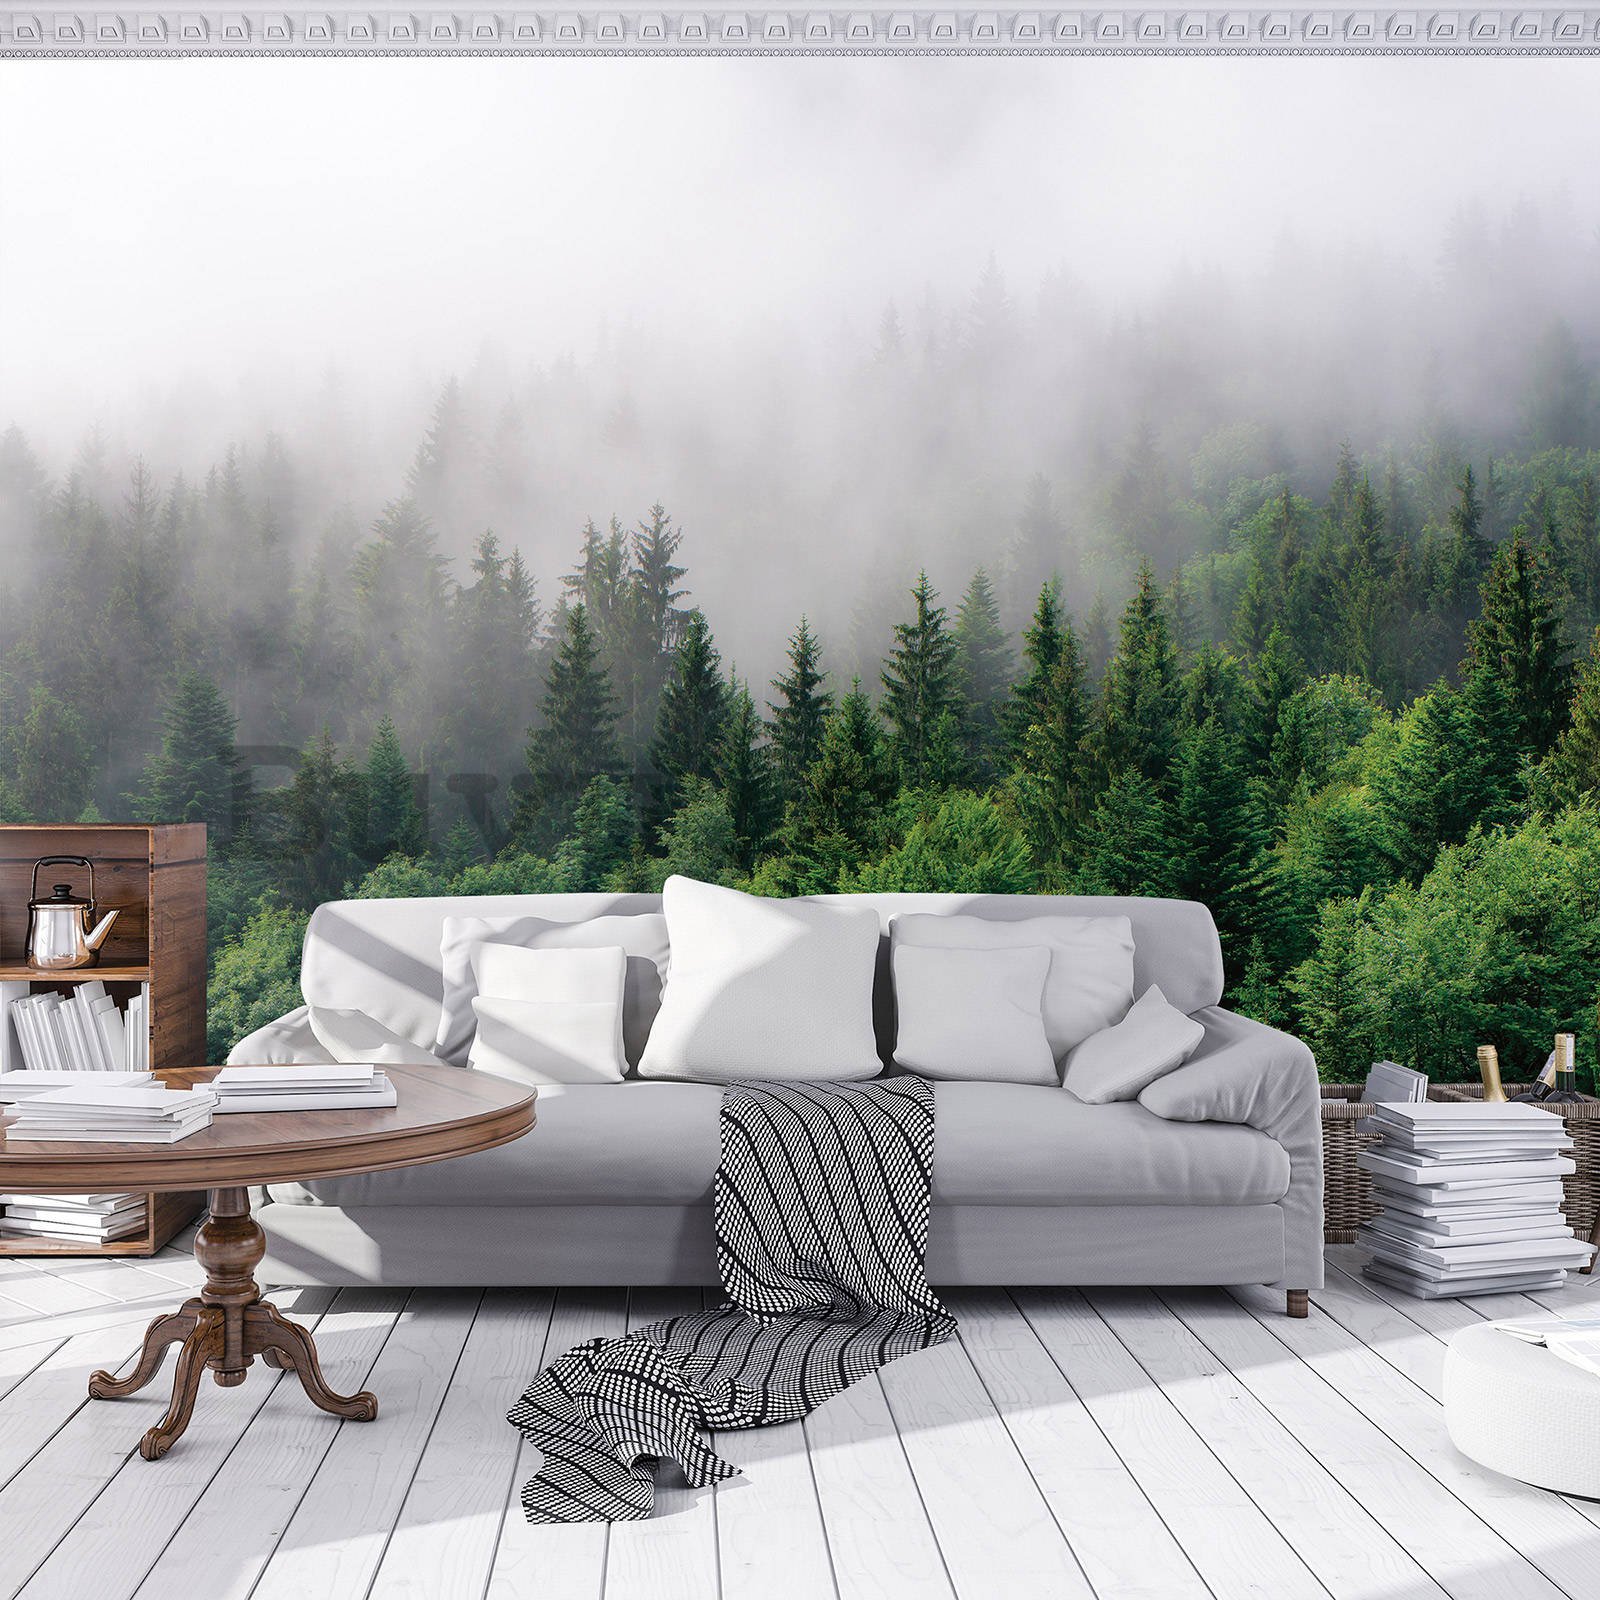 Wall mural vlies: Fog over the forest (2) - 152,5x104 cm